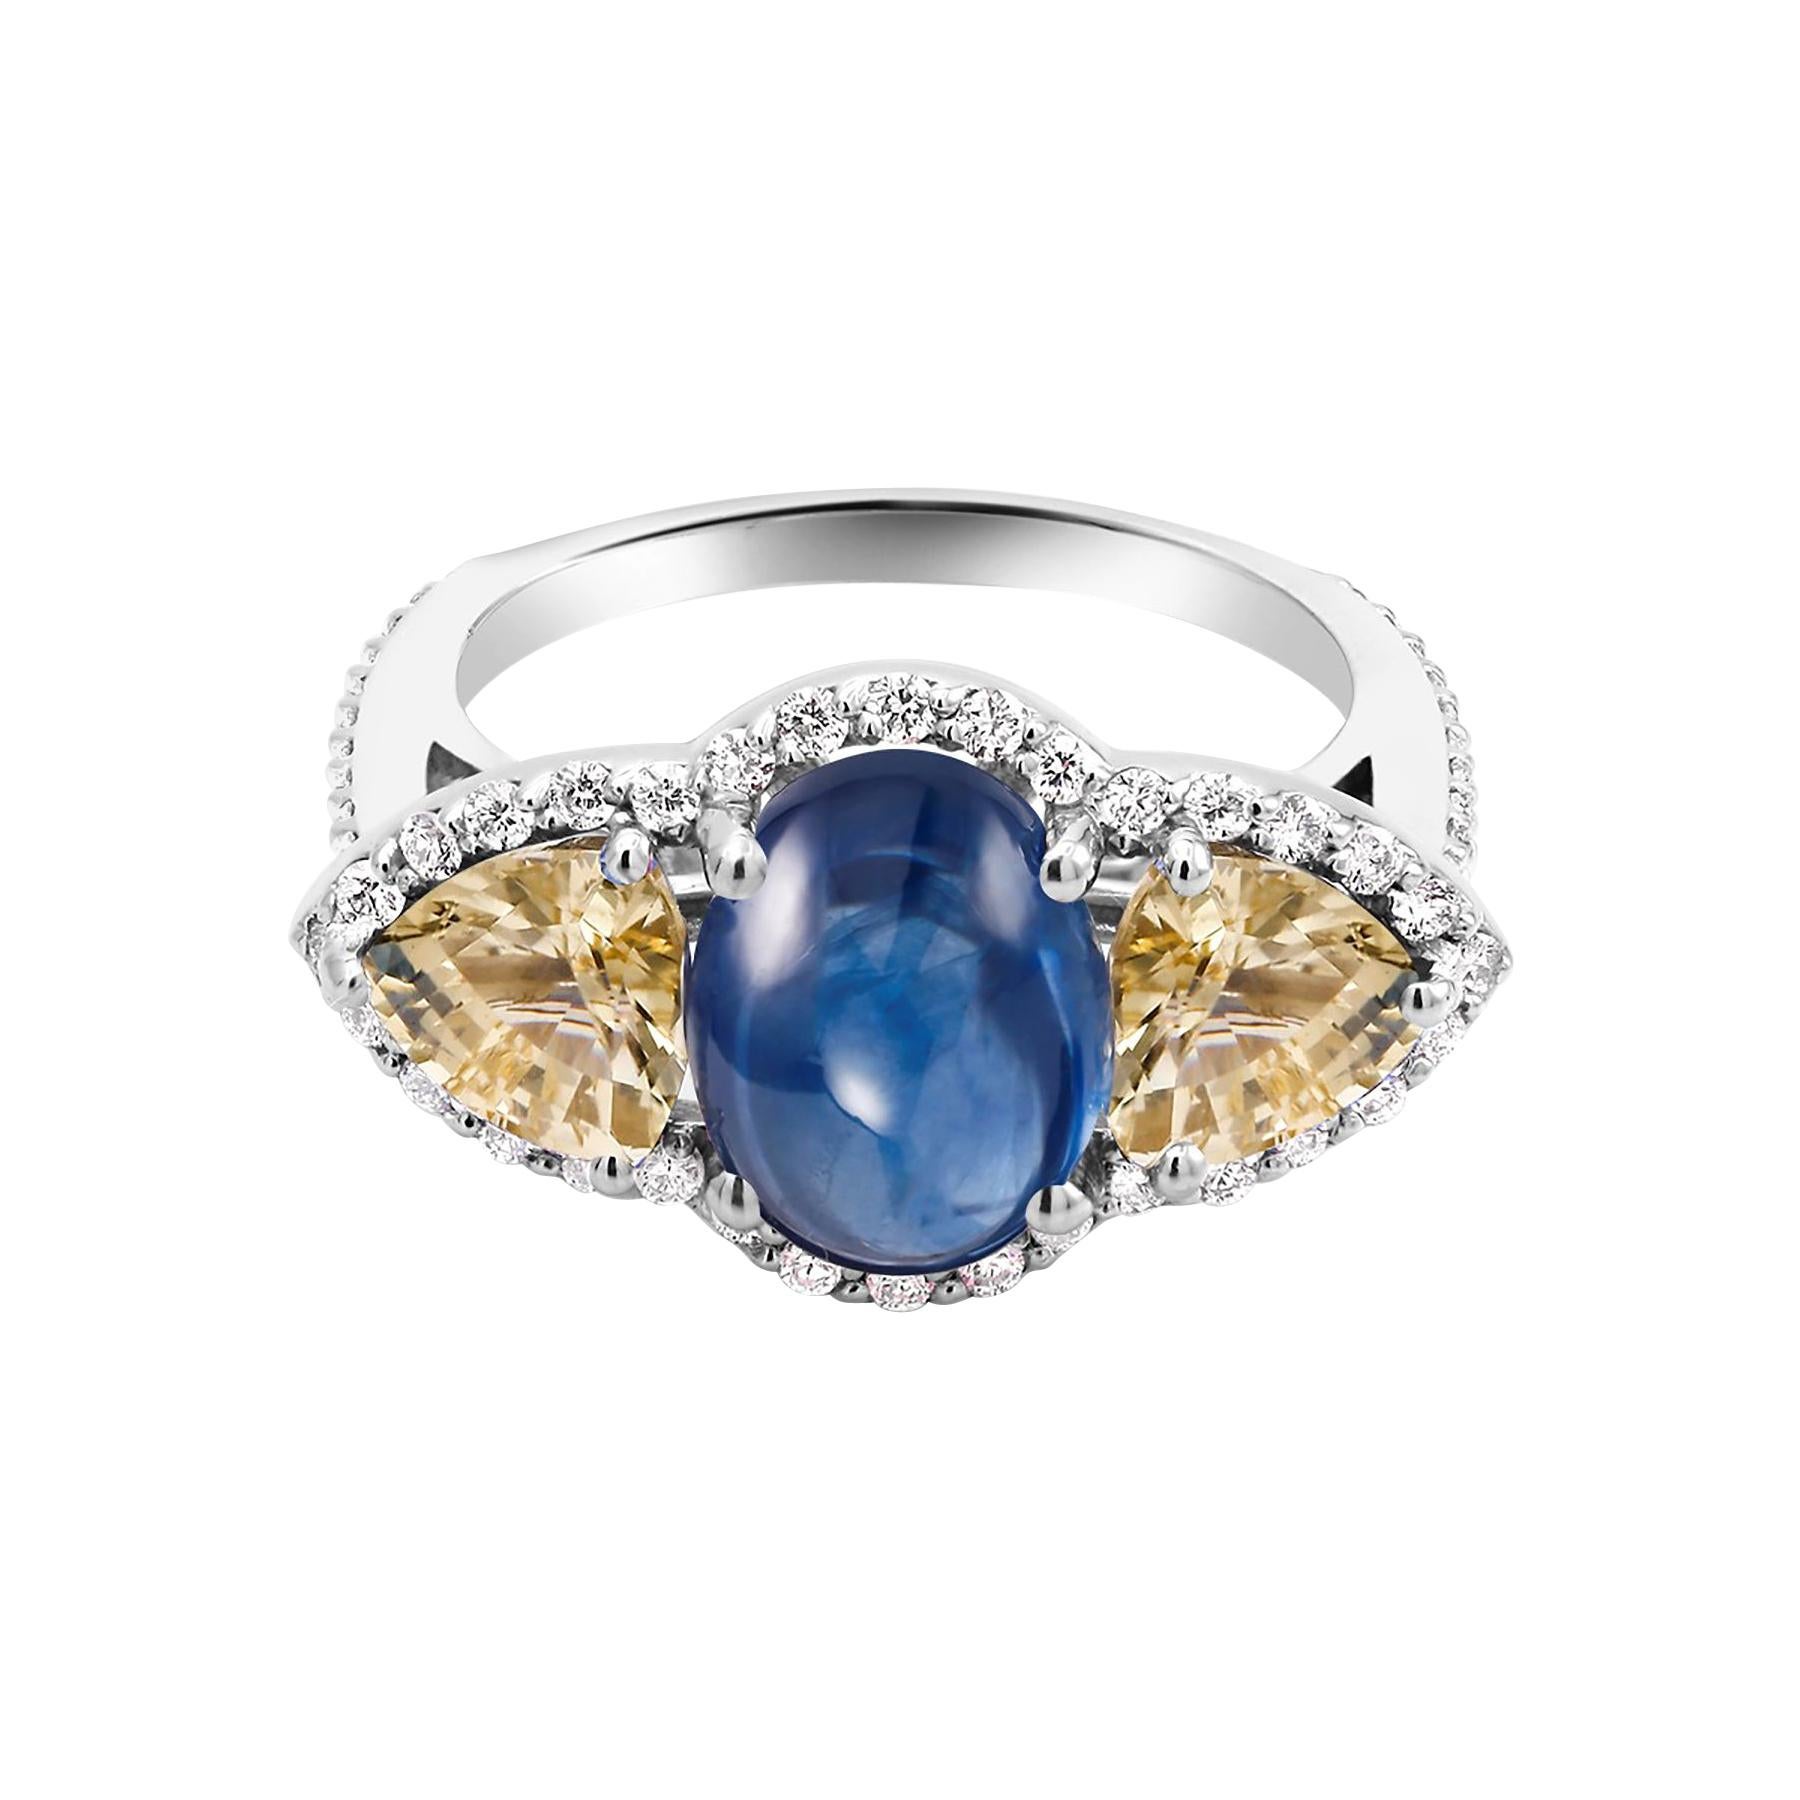 Cabochon Sapphire Yellow Sapphire Diamond Cocktail Gold Ring Weighing 6.74 Carat